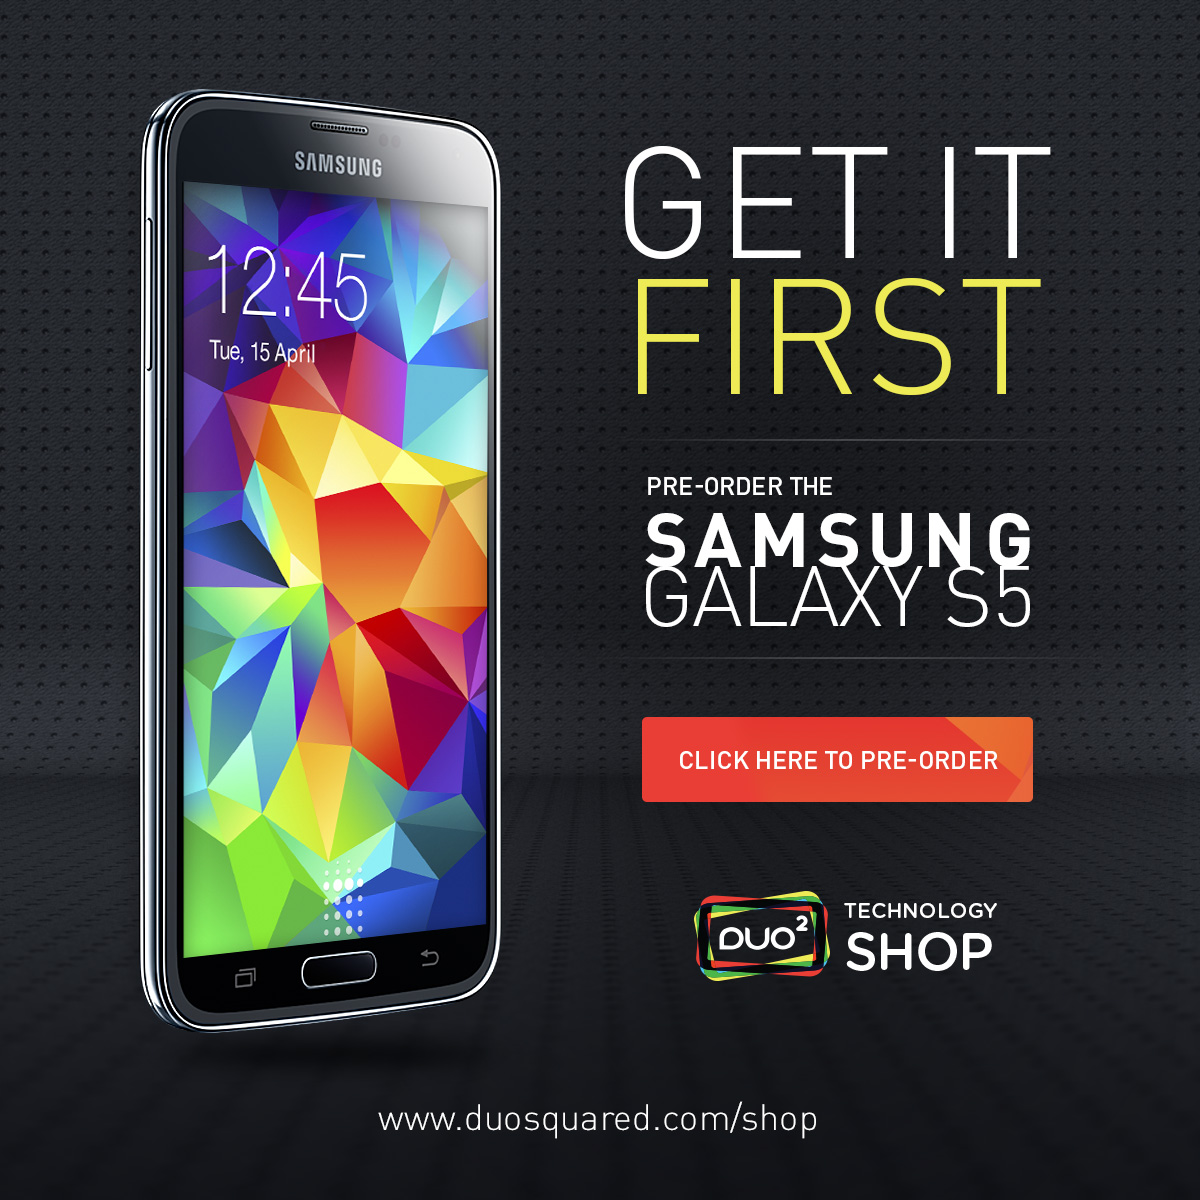 Samsung Galaxy S5 arrives to Namibia Samsung Galaxy S5 arrives to Namibia Facebook1200x1200 Pre order